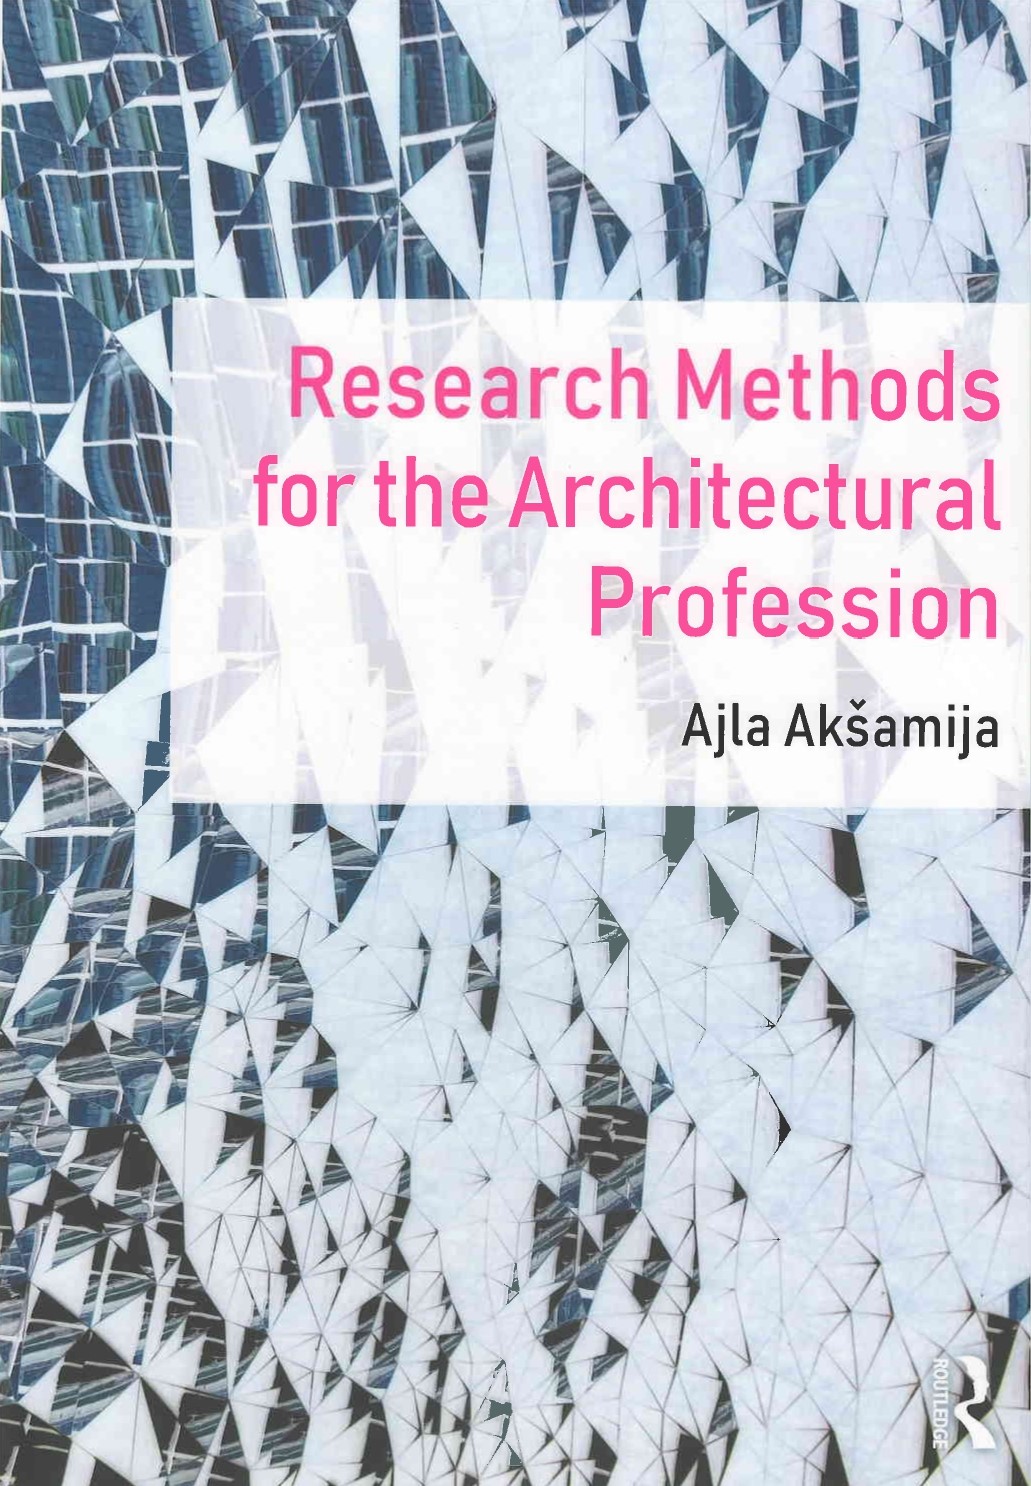 Research methods for the architectural profession